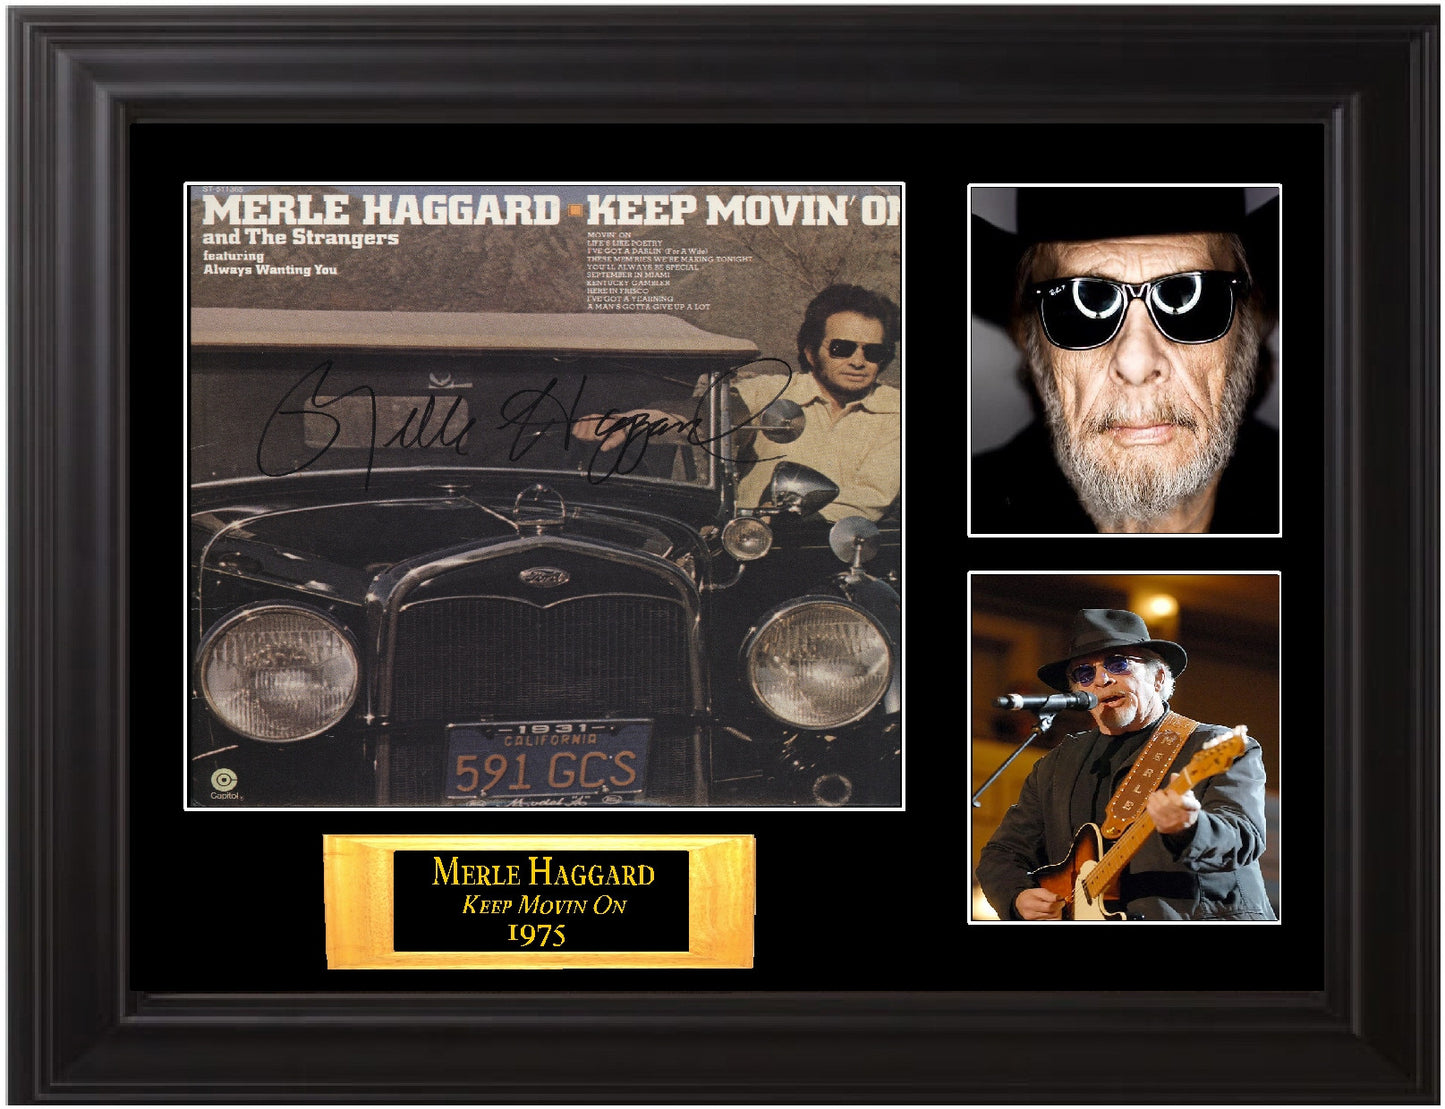 Merle Haggard Autographed Lp "Keep Movin' On" - Zion Graphic Collectibles